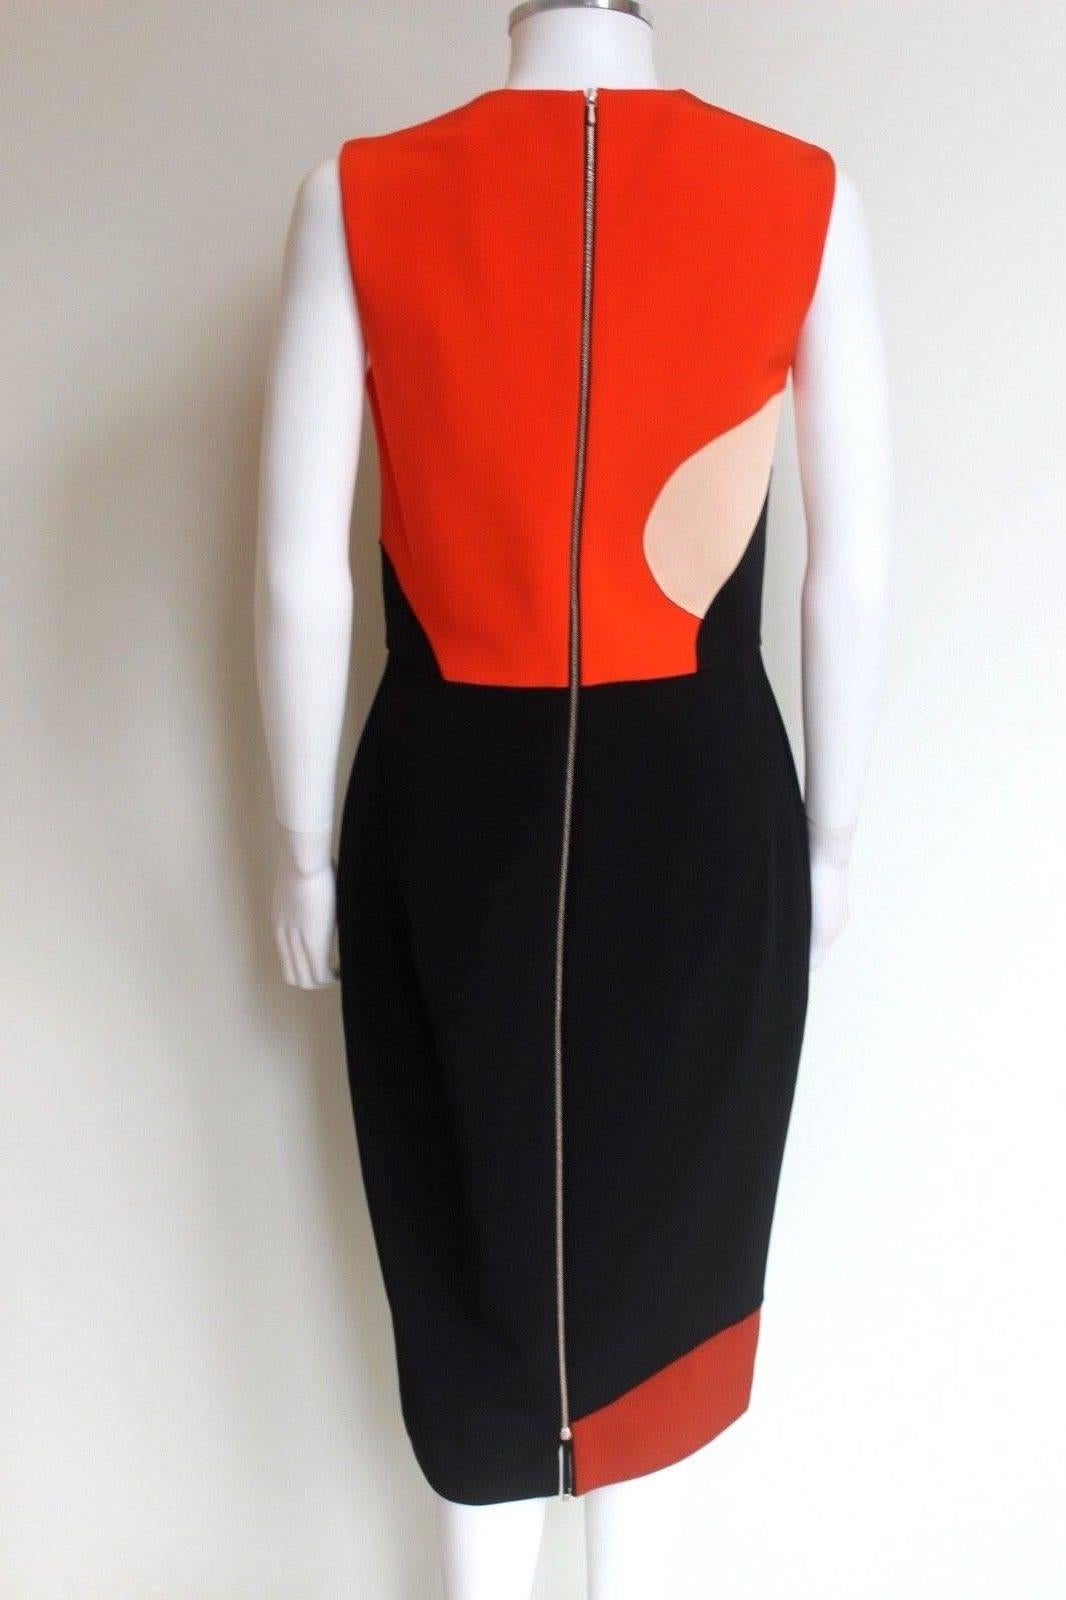 New Victoria Beckham Sleeveless Heart Colorblock Sheath Dress, Sunset UK 12-14
Victoria Beckham dense-ribbed knit dress with heart-shaped colorblock effect.
Jewel neckline.
Sleeveless; full shoulder coverage.
Fitted silhouette.
Straight